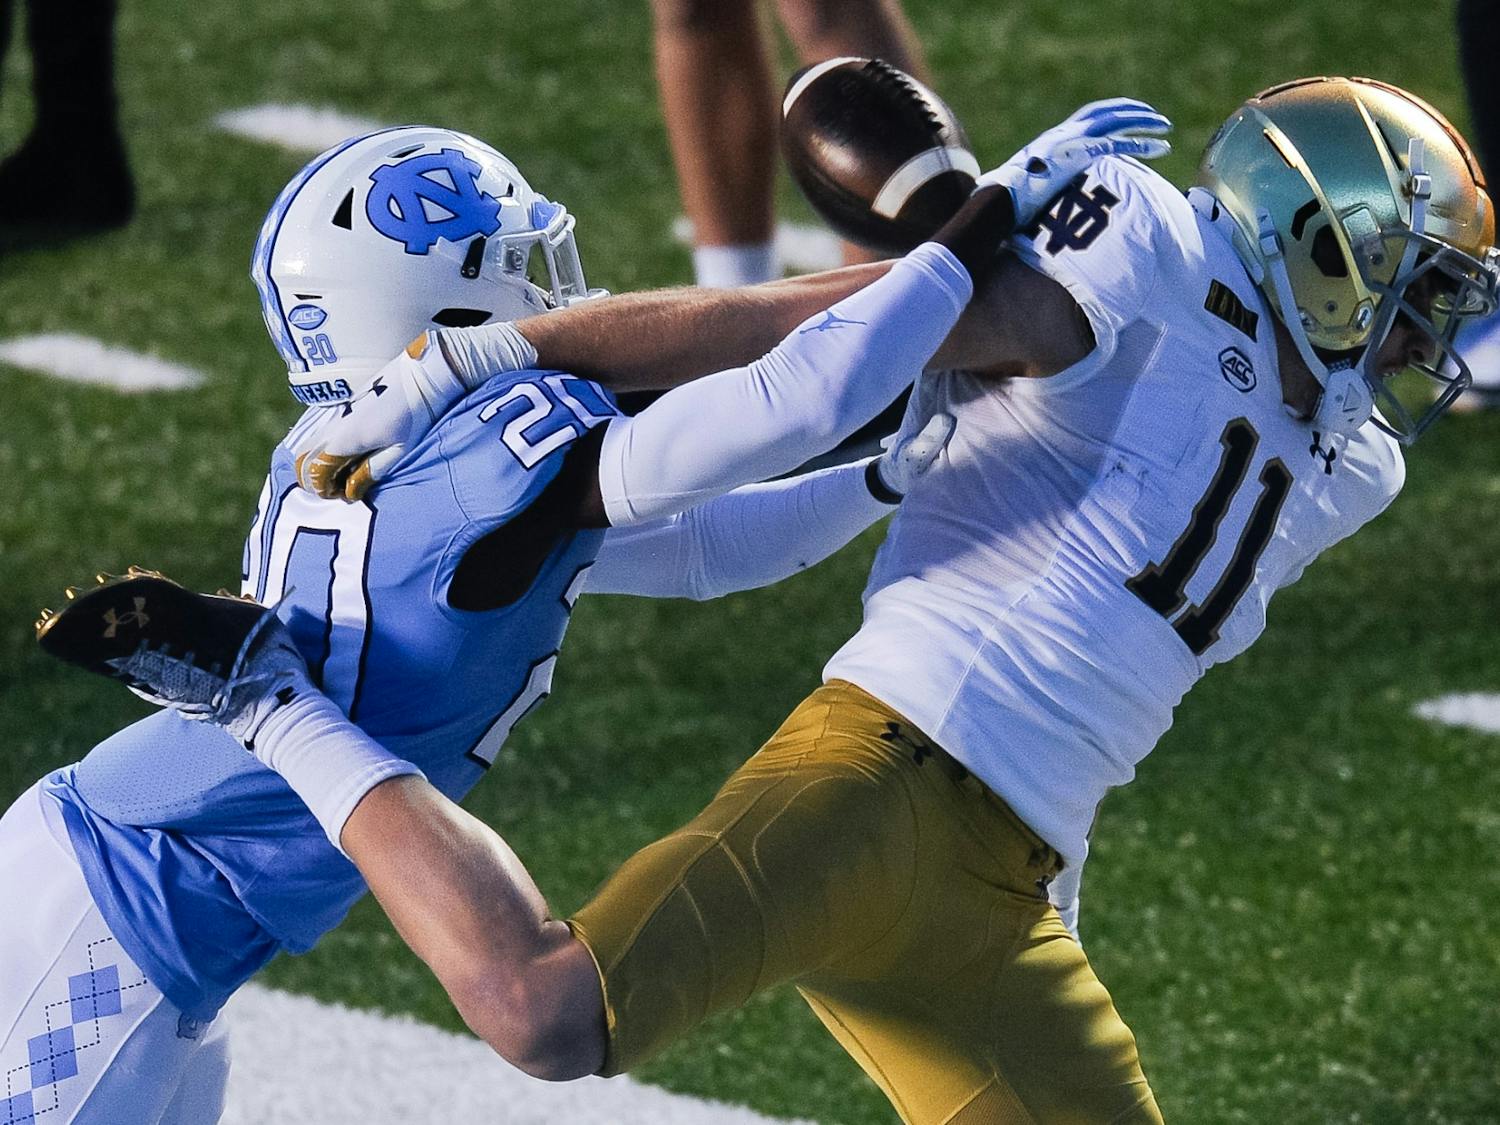 UNC's first year center back Tony Grimes (20) blocks a pass to Notre Dame's graduate wide receiver Ben Skowronek (11) during a game in Kenan Memorial Stadium on Friday, Nov. 27, 2020. Notre Dame beat UNC 31-17.